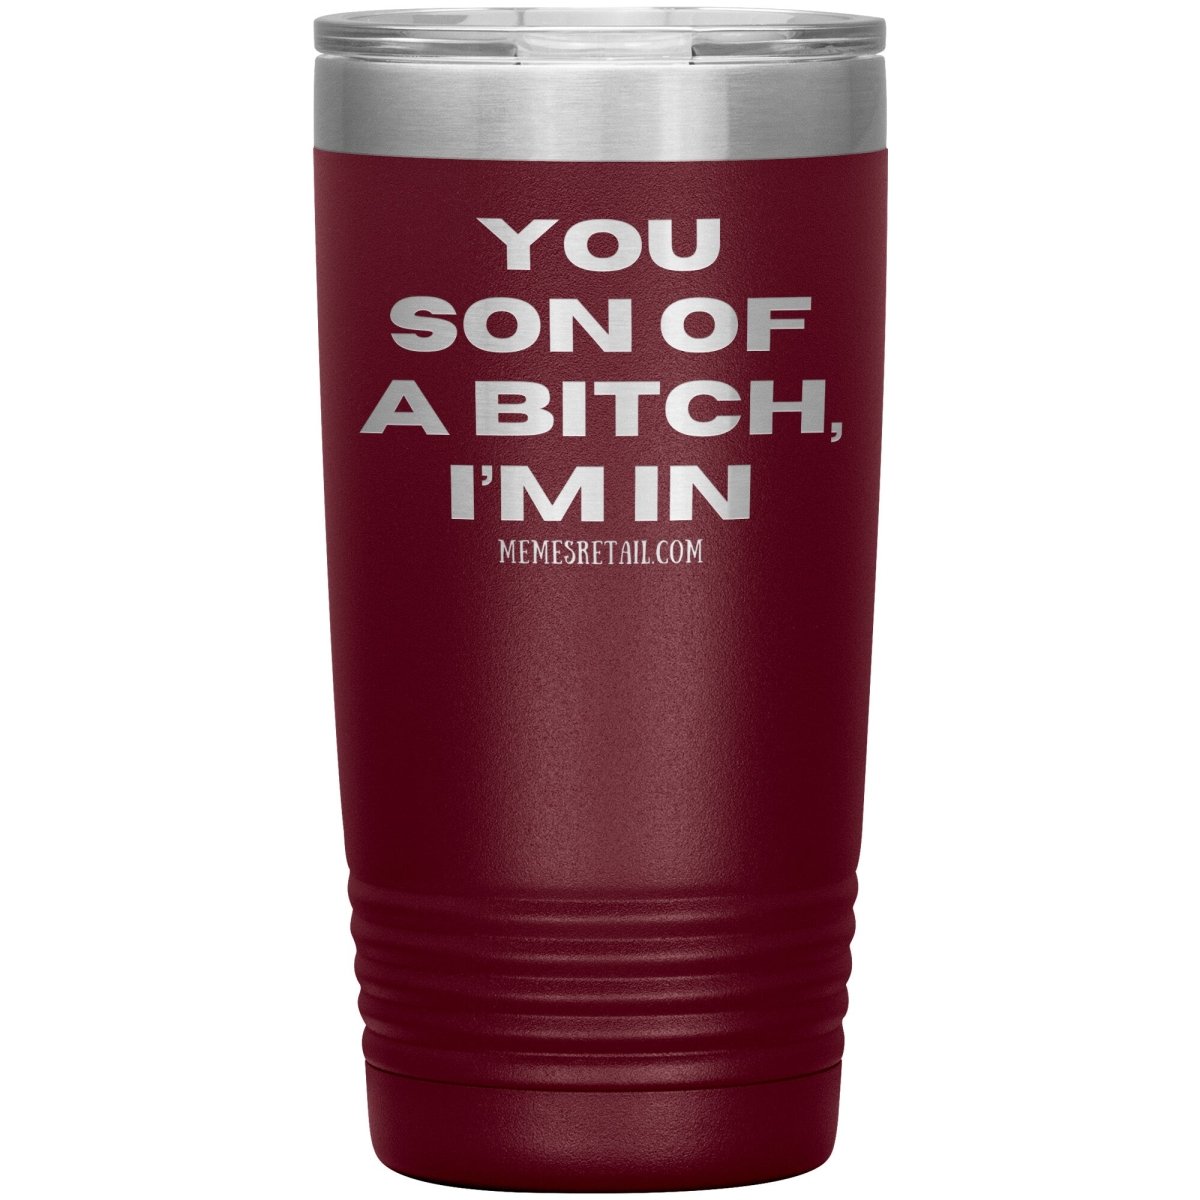 You son of a bitch, I’m in Tumblers, 20oz Insulated Tumbler / Maroon - MemesRetail.com